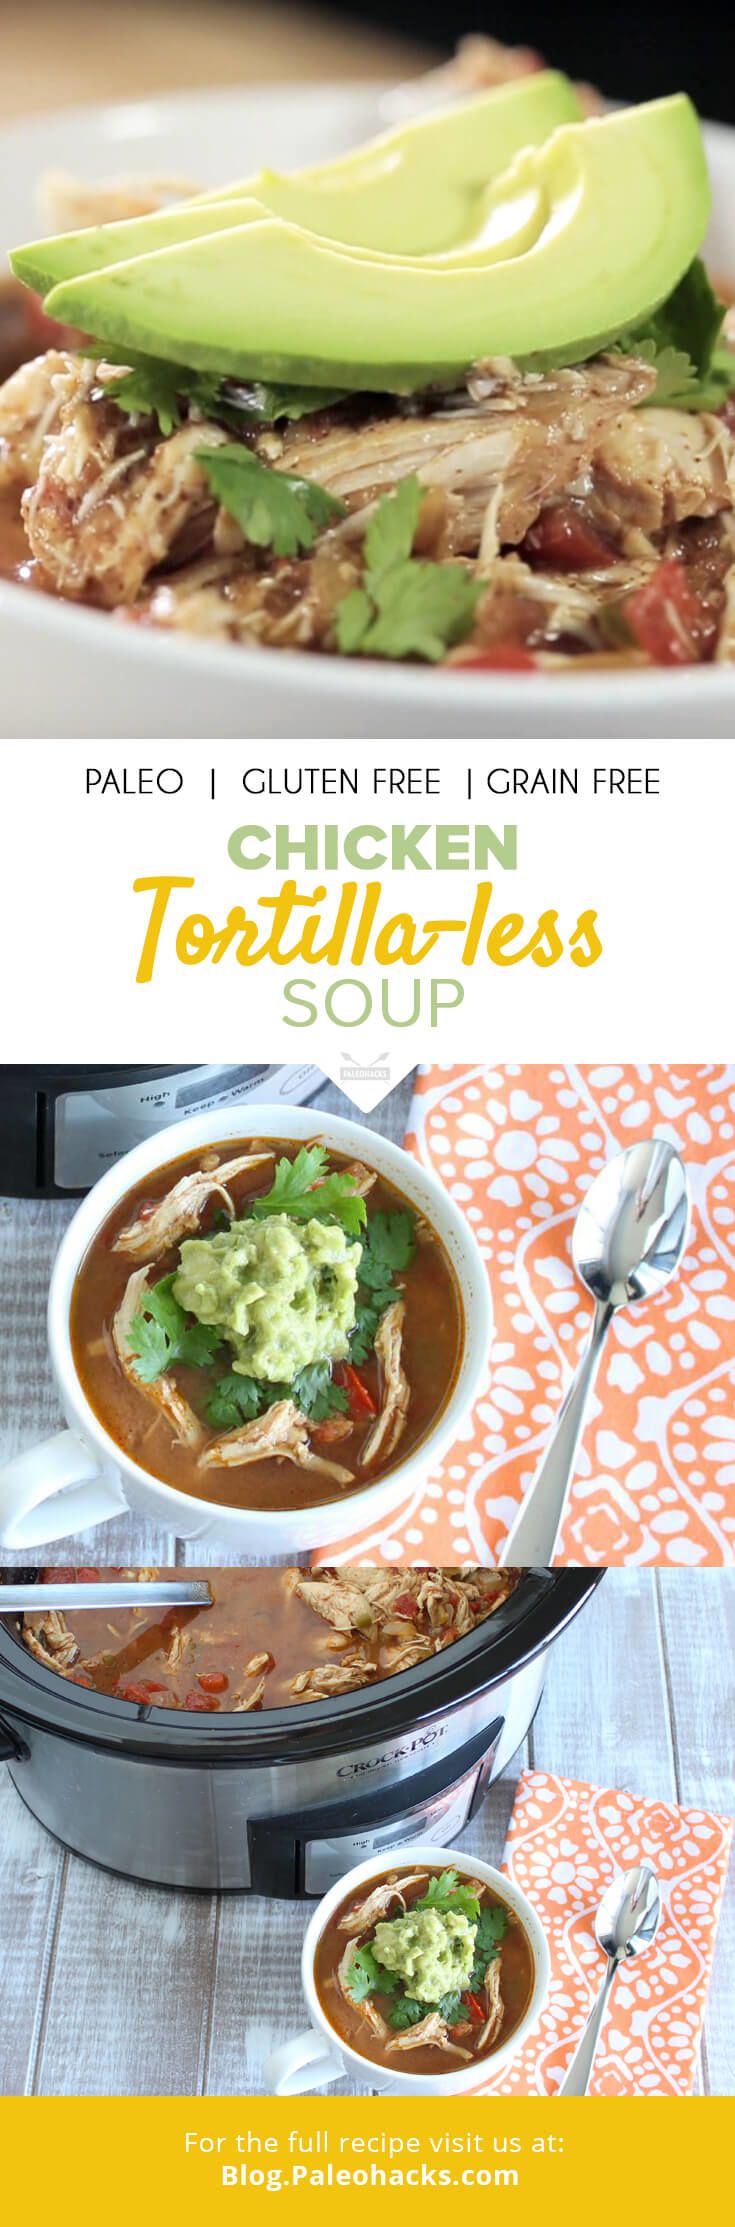 Traditional-PIN-CHICKEN-tortilla-less-soup-2